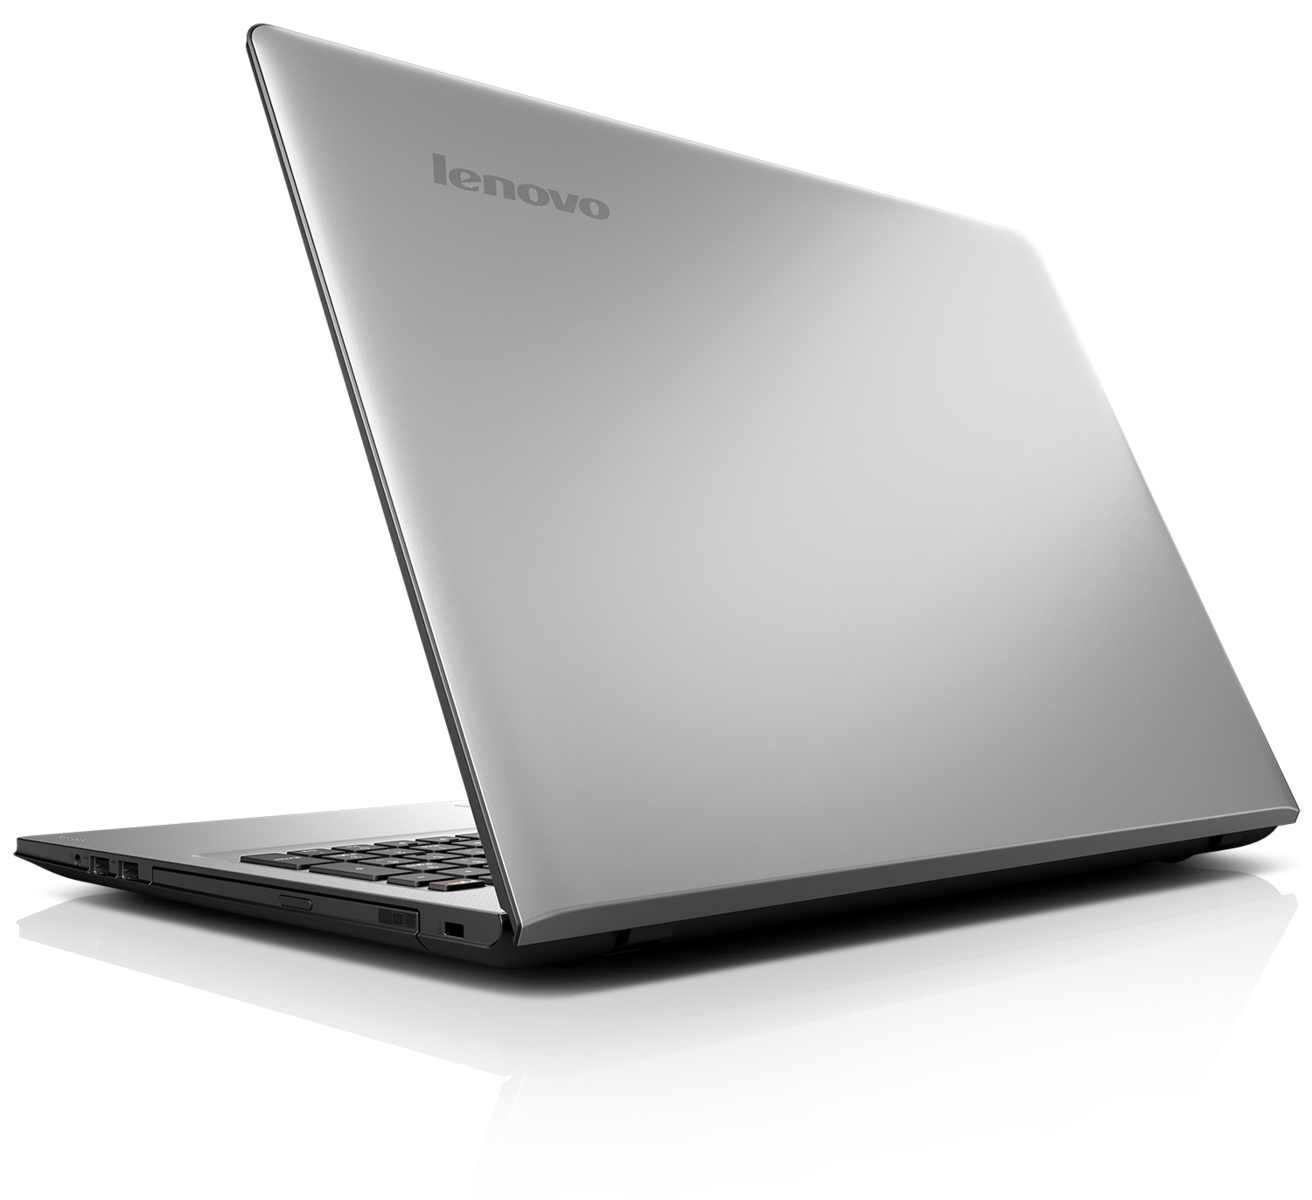 Lenovo Ideapad 300 and 300S series coming this October 